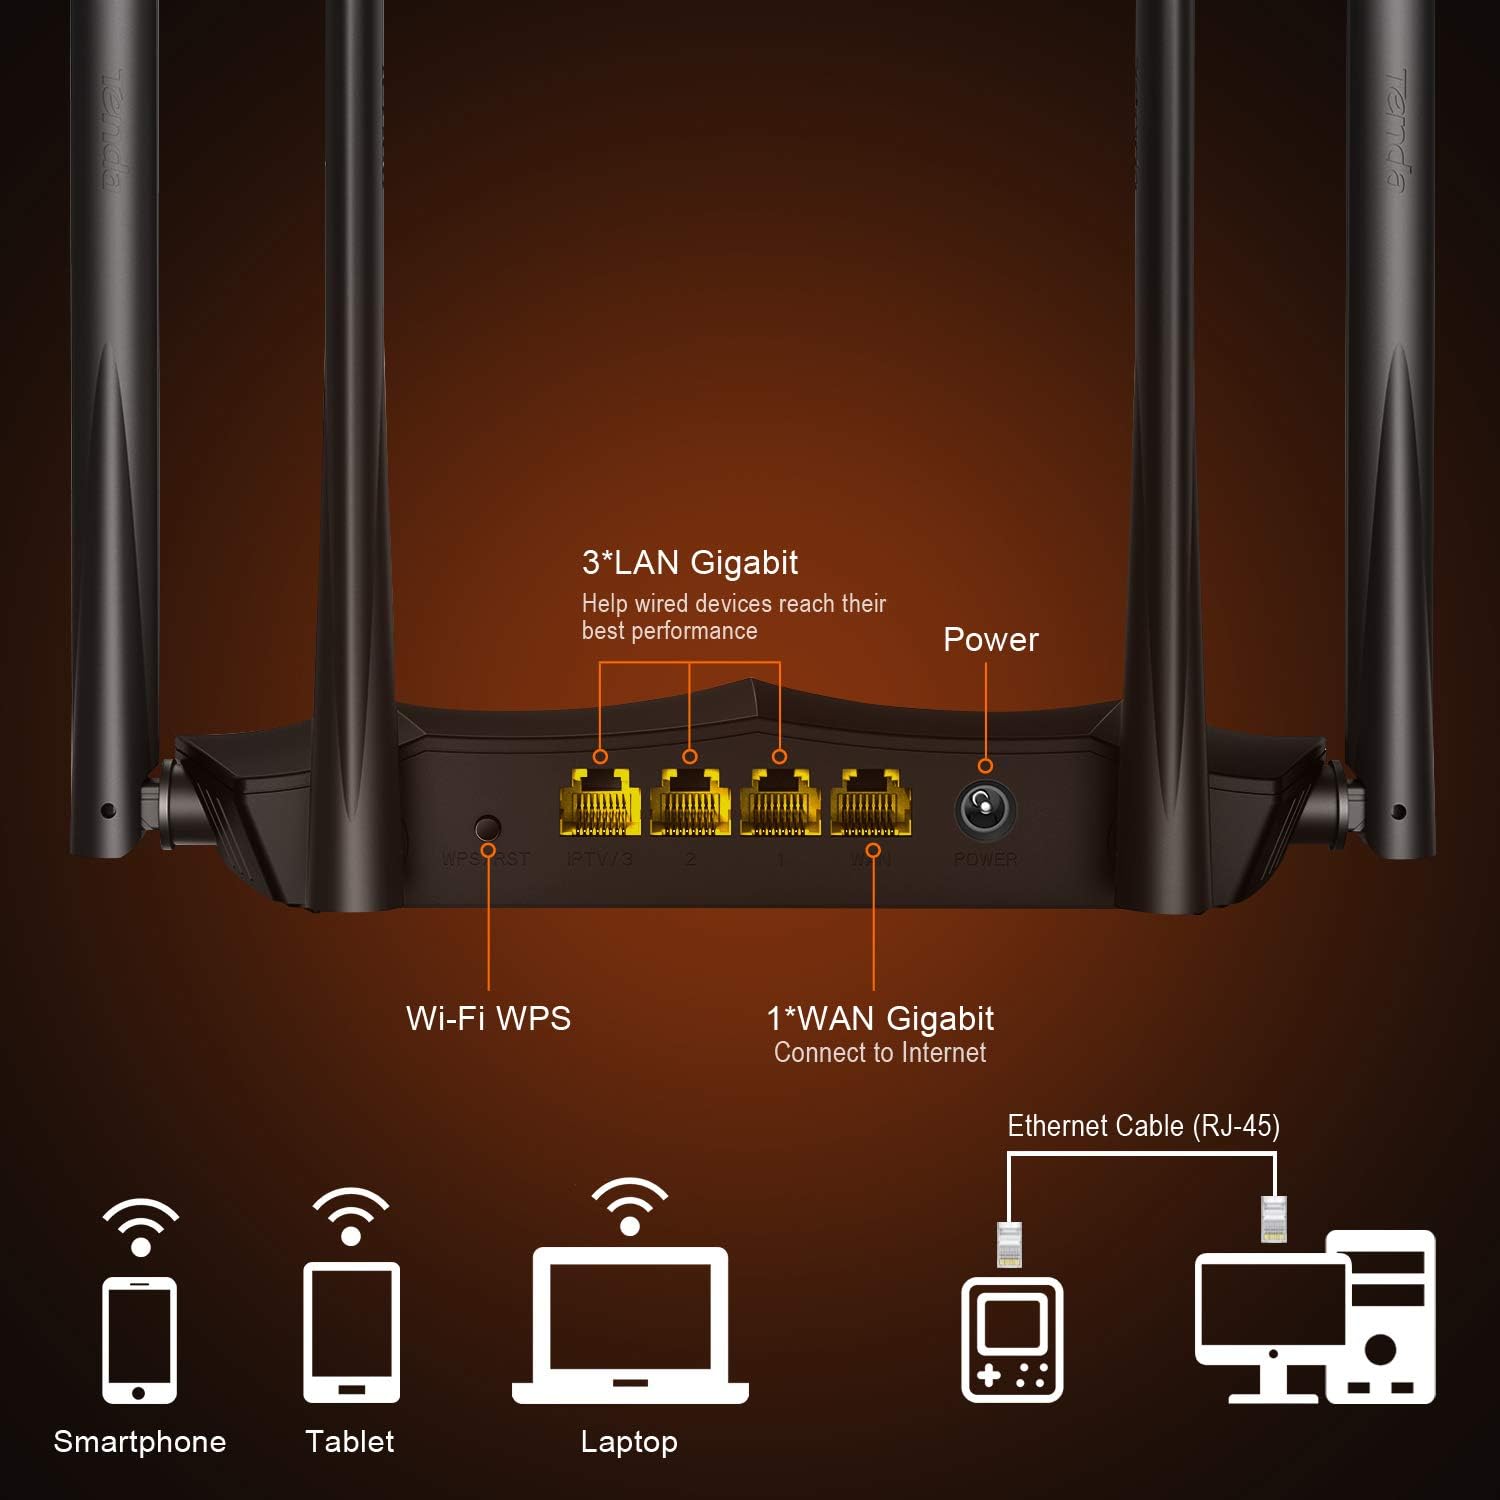 Tenda AC8 AC1200 MU-MIMO Wireless Gigabit Router, Wi-Fi speed up to 867Mbps/5G + 300Mbps/2.4G, 4 Gigabit Ports, Supports Parental Control, APP management, Guest Wi-Fi, IPV6